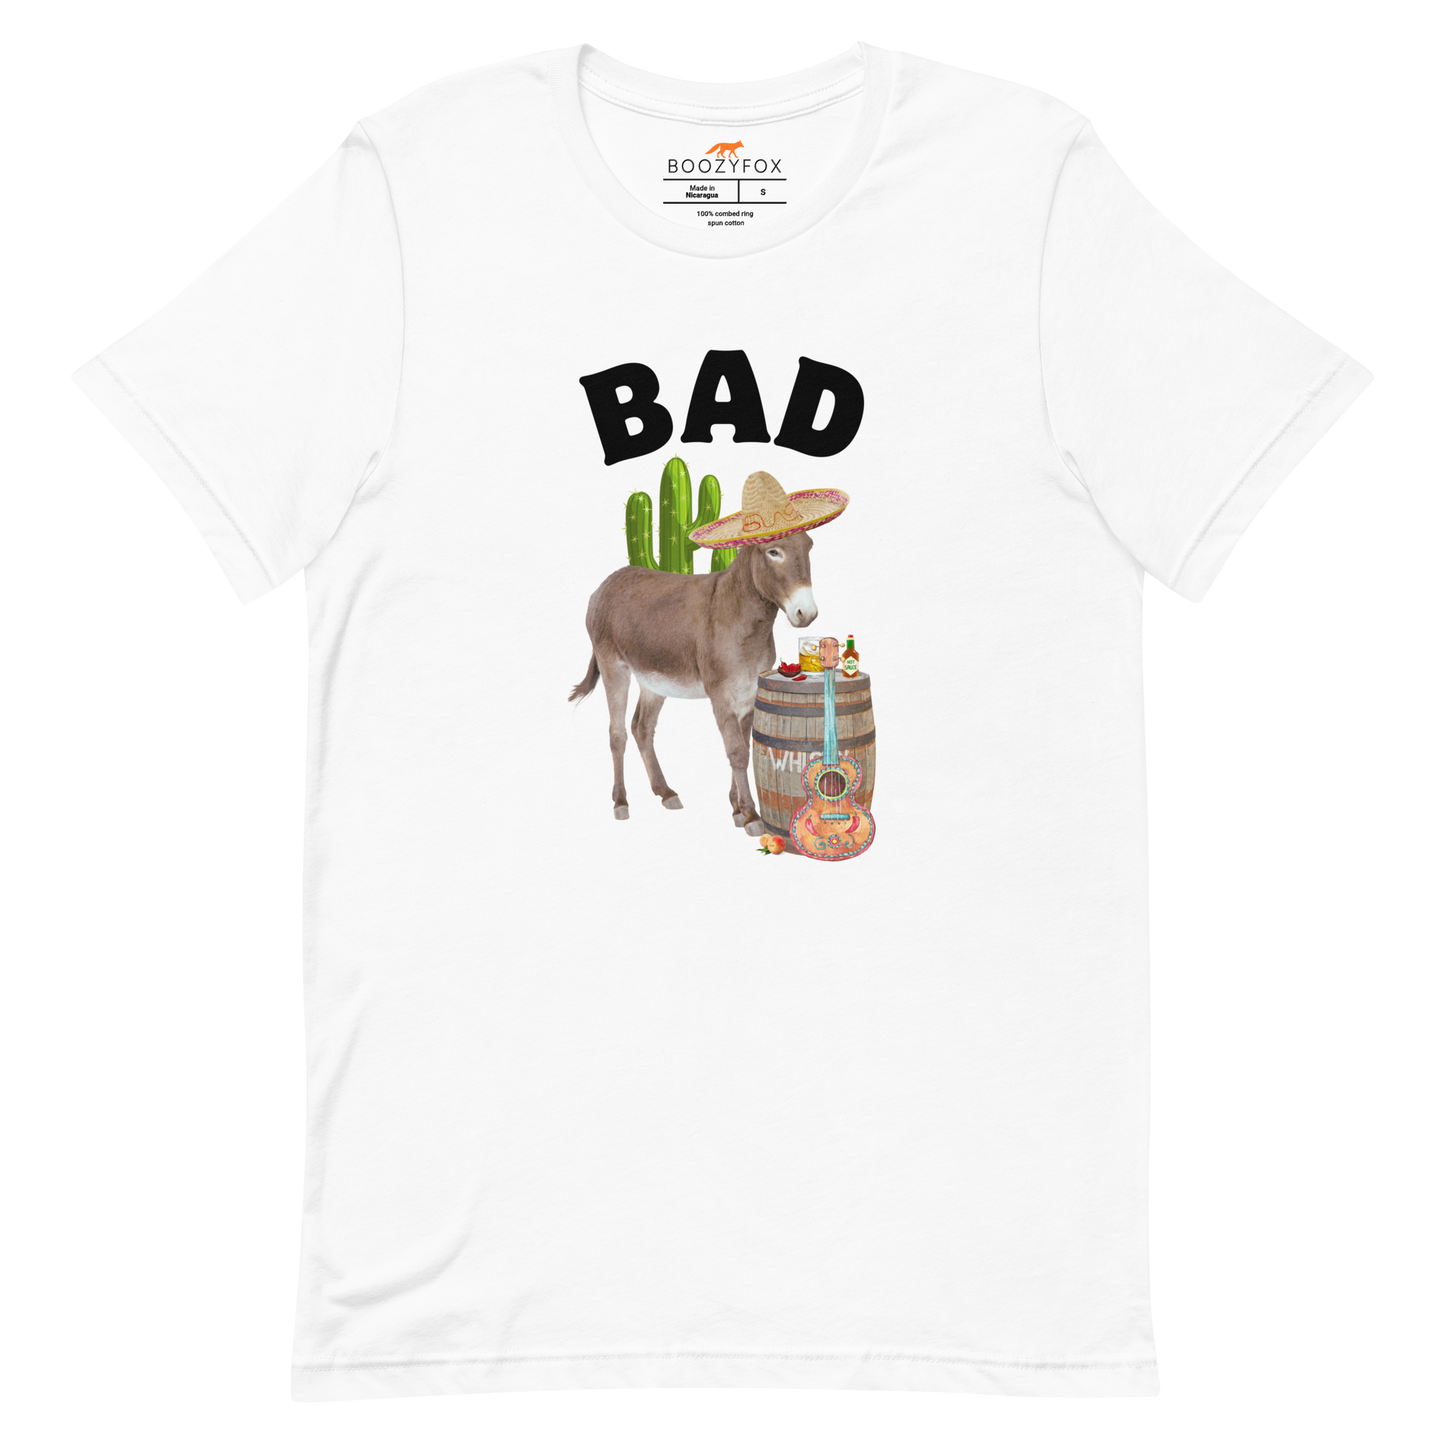 White Premium Donkey Tee featuring a Funny Bad Ass Donkey graphic on the chest - Funny Graphic Bad Ass Donkey Tees - Boozy Fox